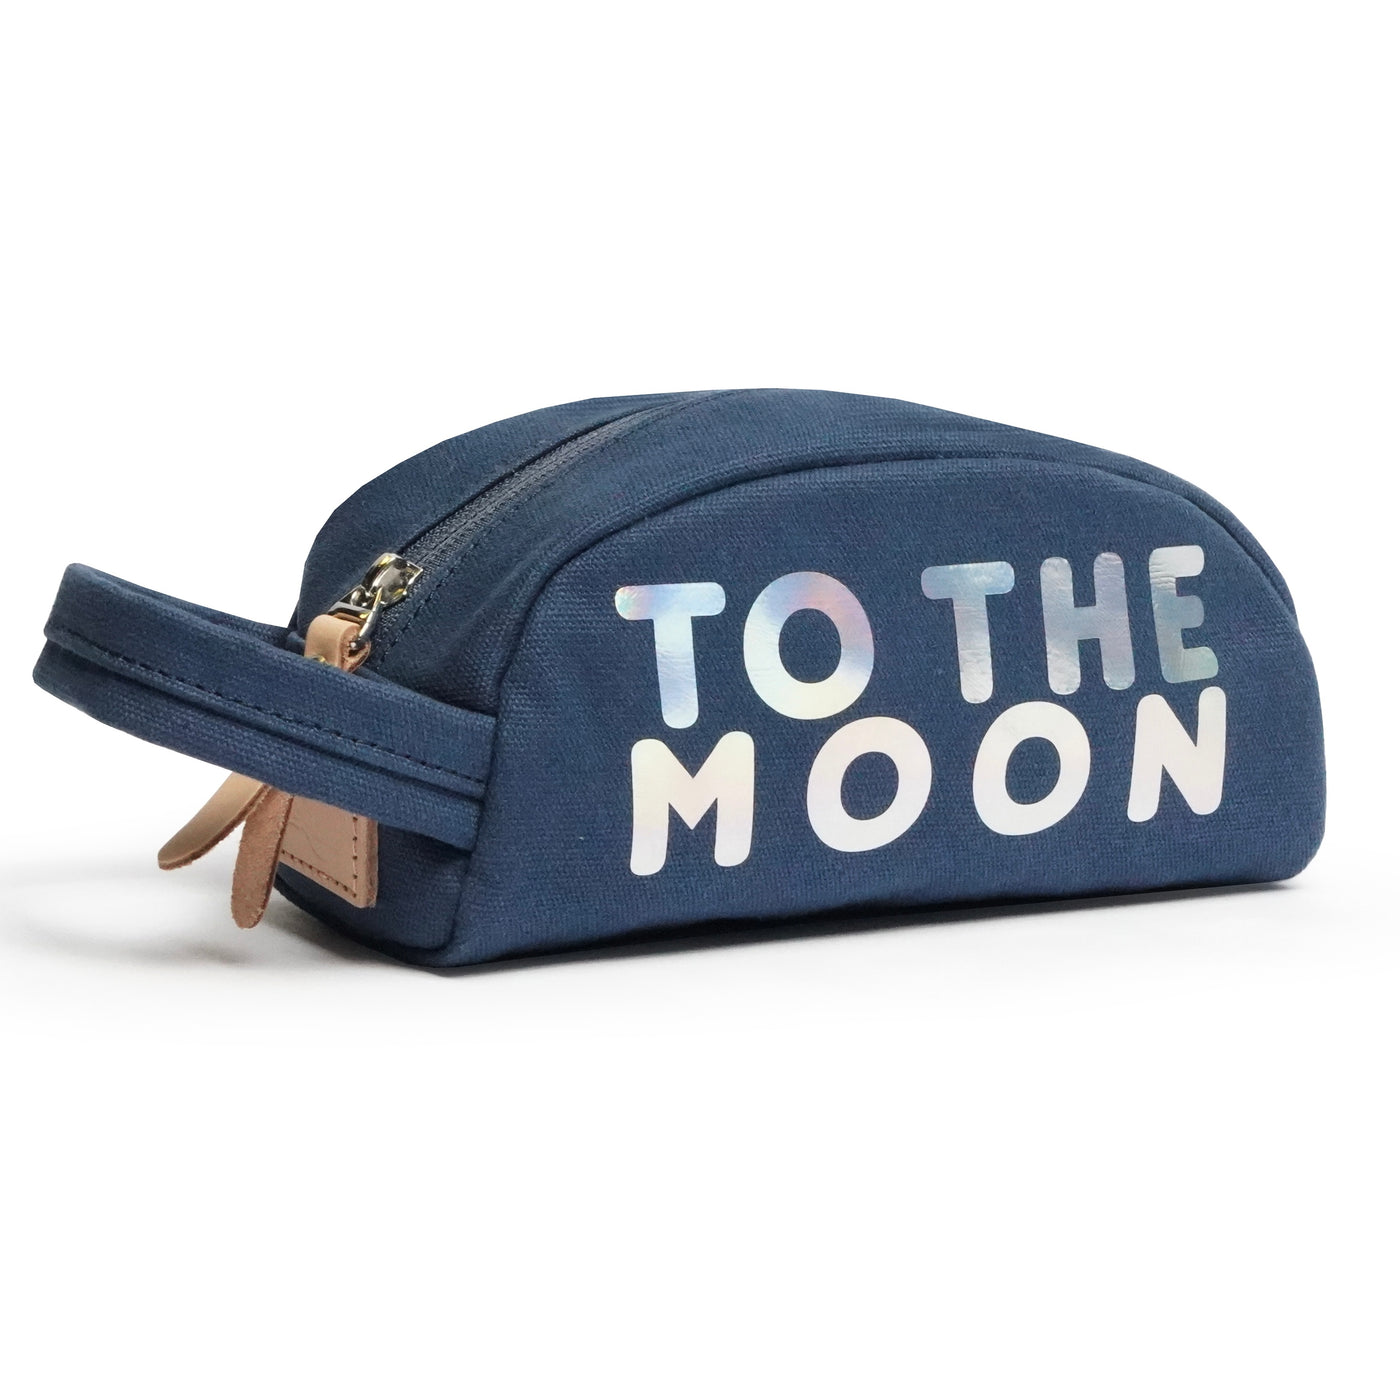 Etui to the moon